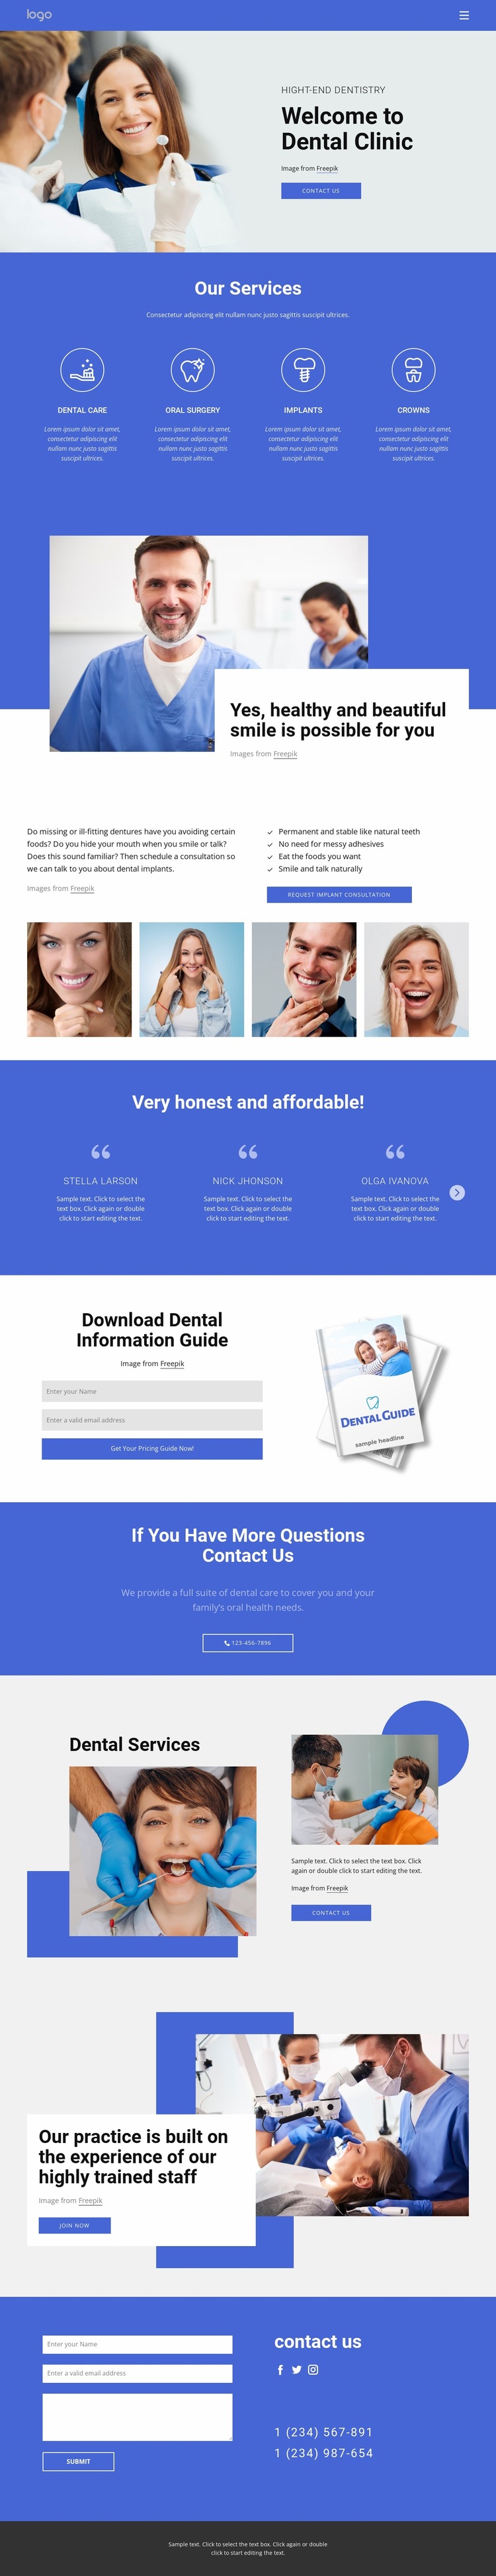 Welcome to dental clinic Website Design